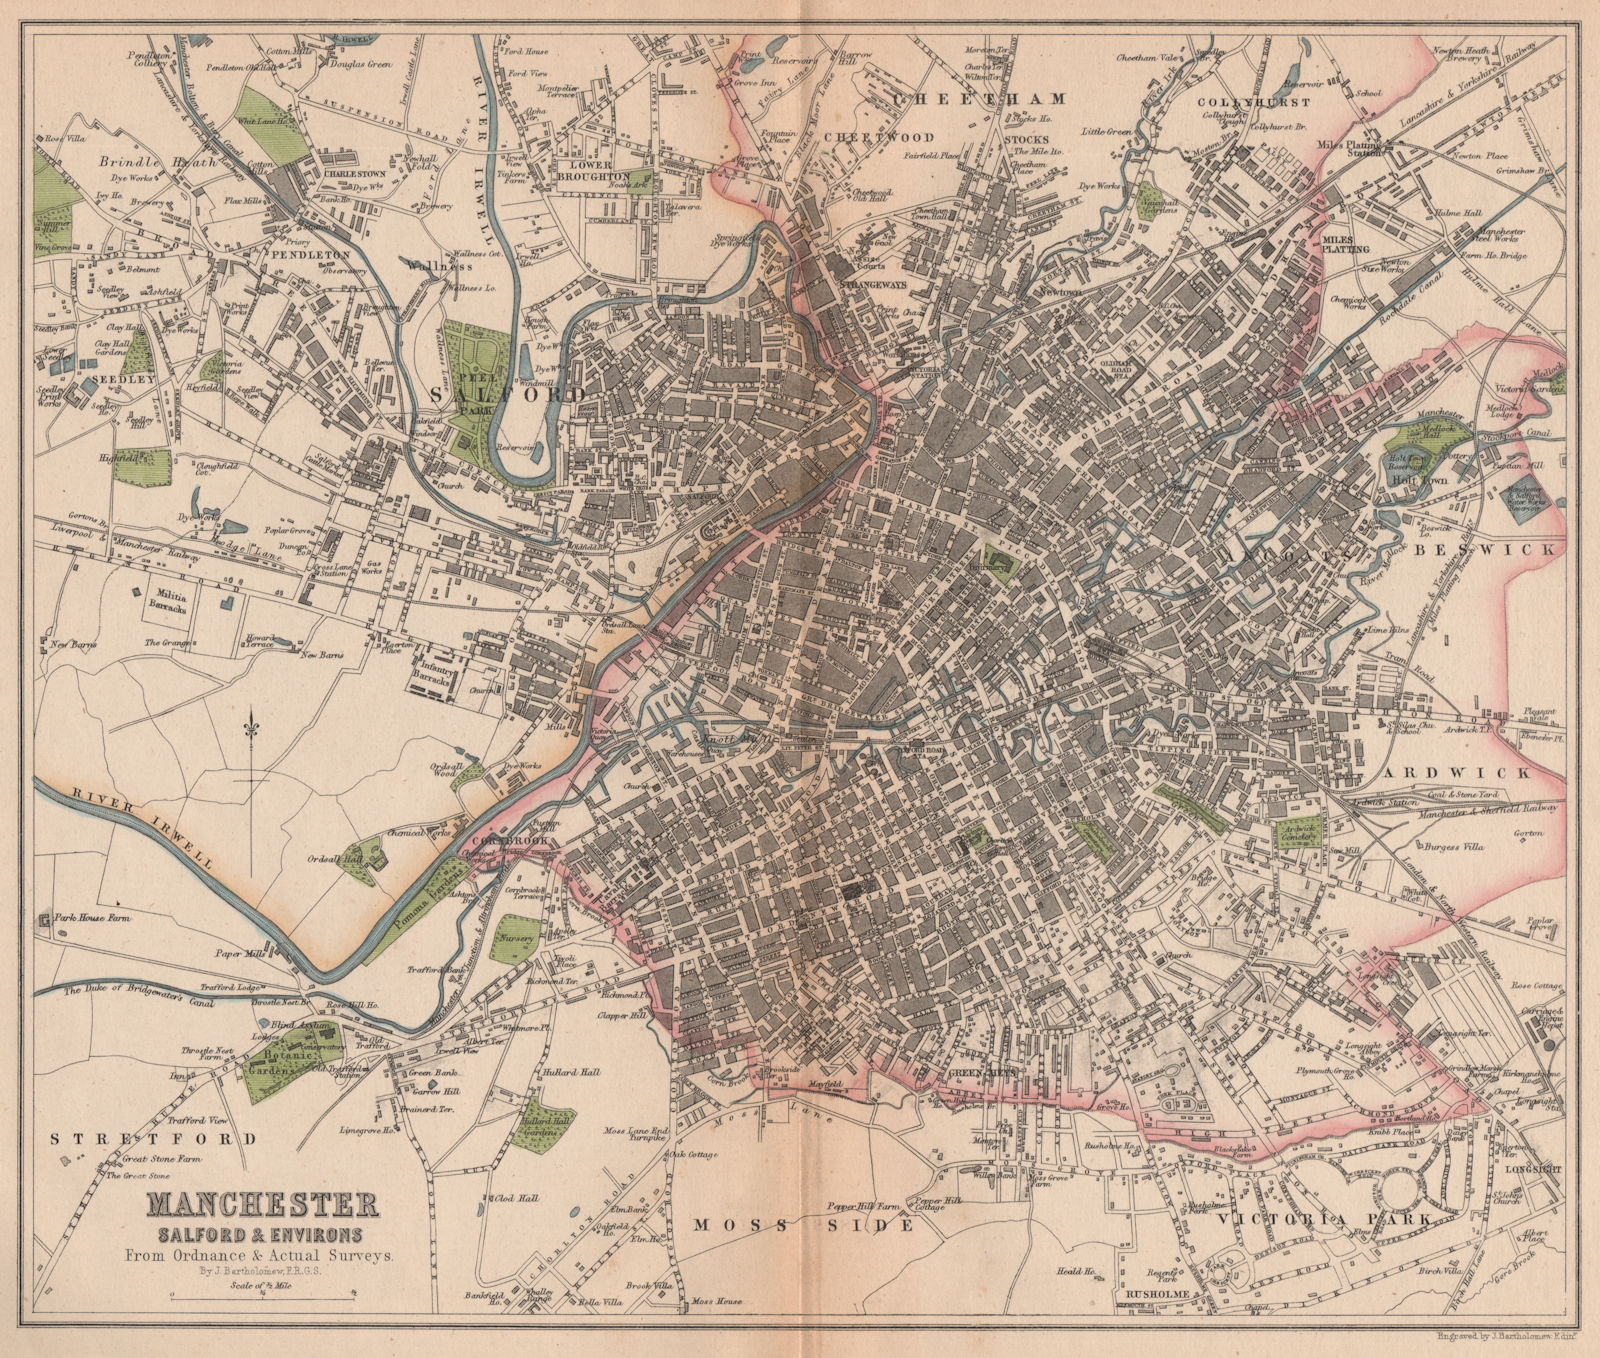 Associate Product MANCHESTER. Antique town city plan. Salford. BARTHOLOMEW 1865 old map